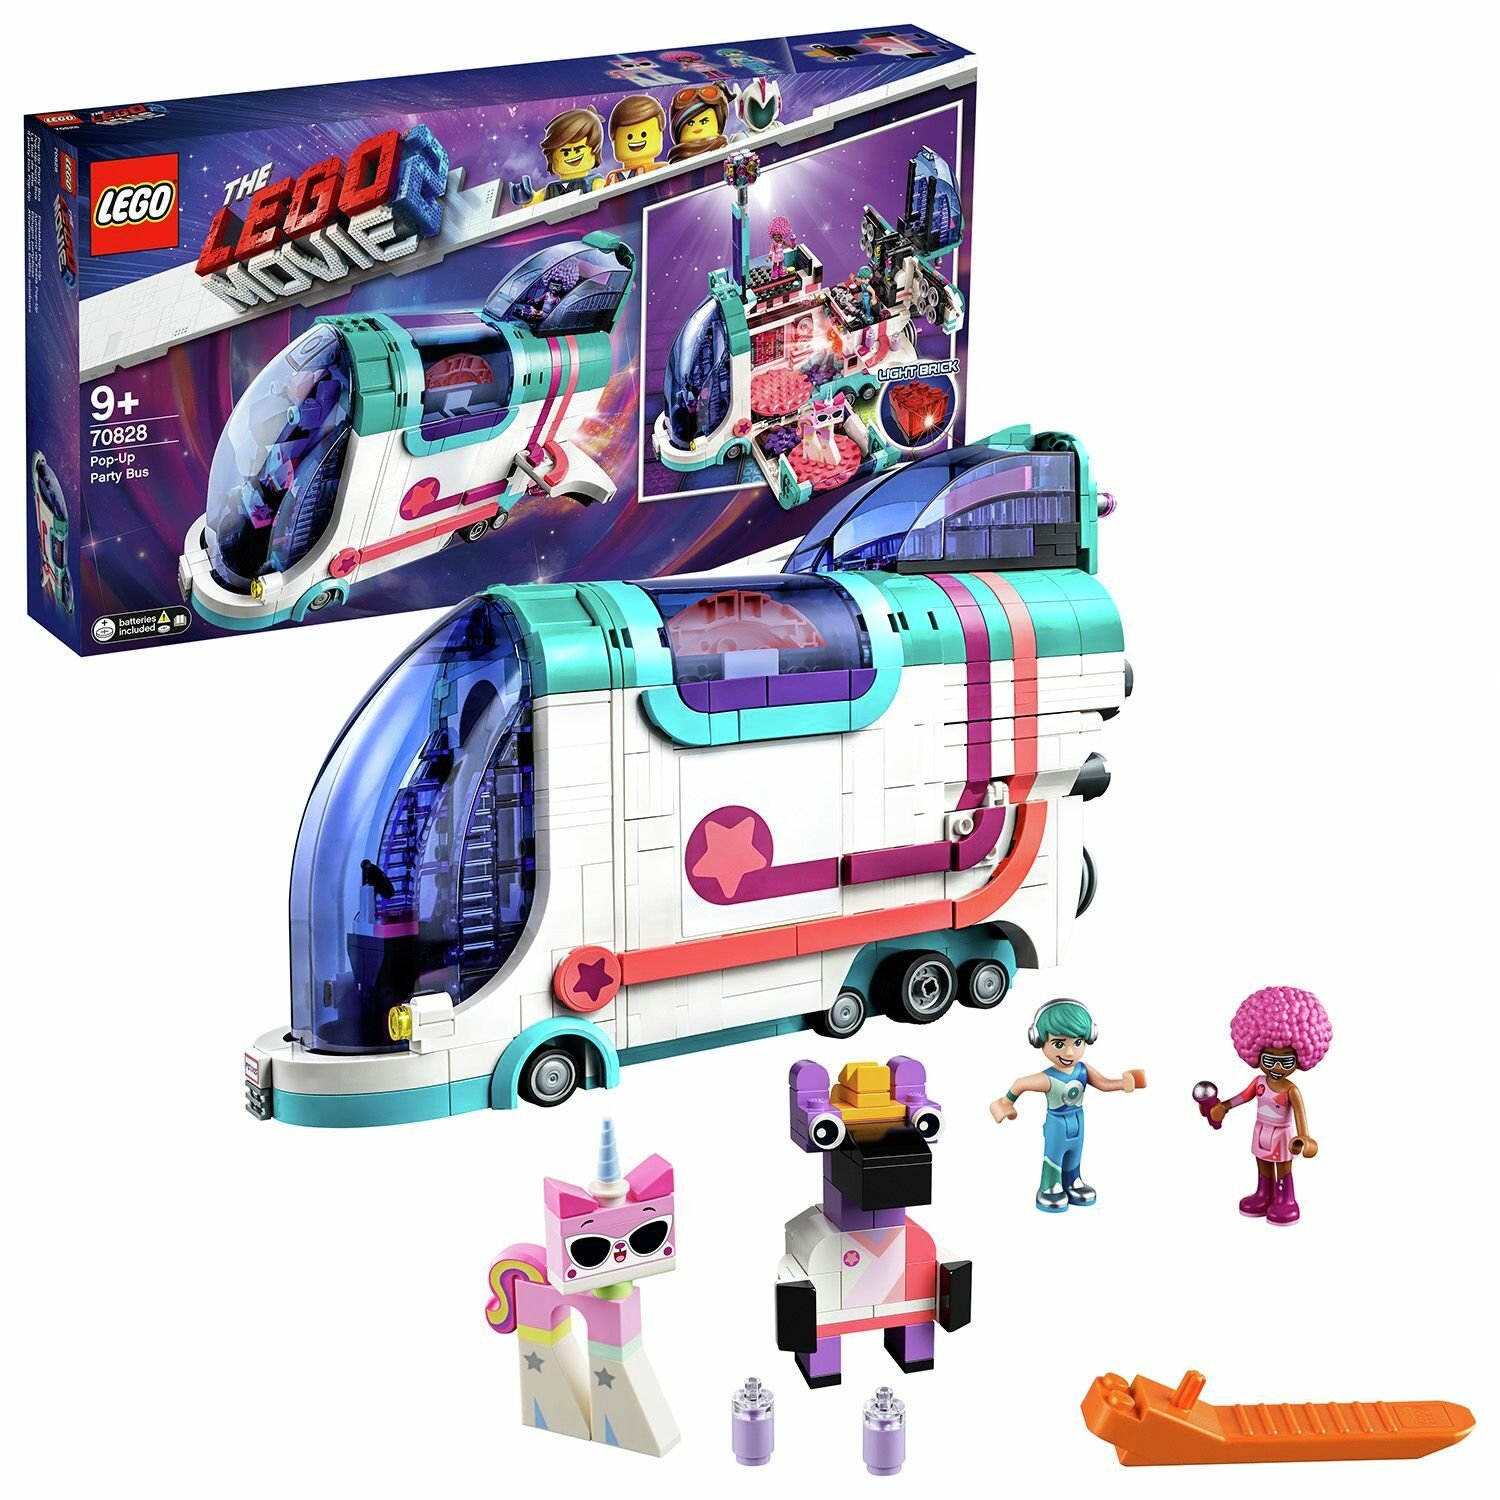 LEGO Movie 2 Pop-Up Party Bus Playset - 70828